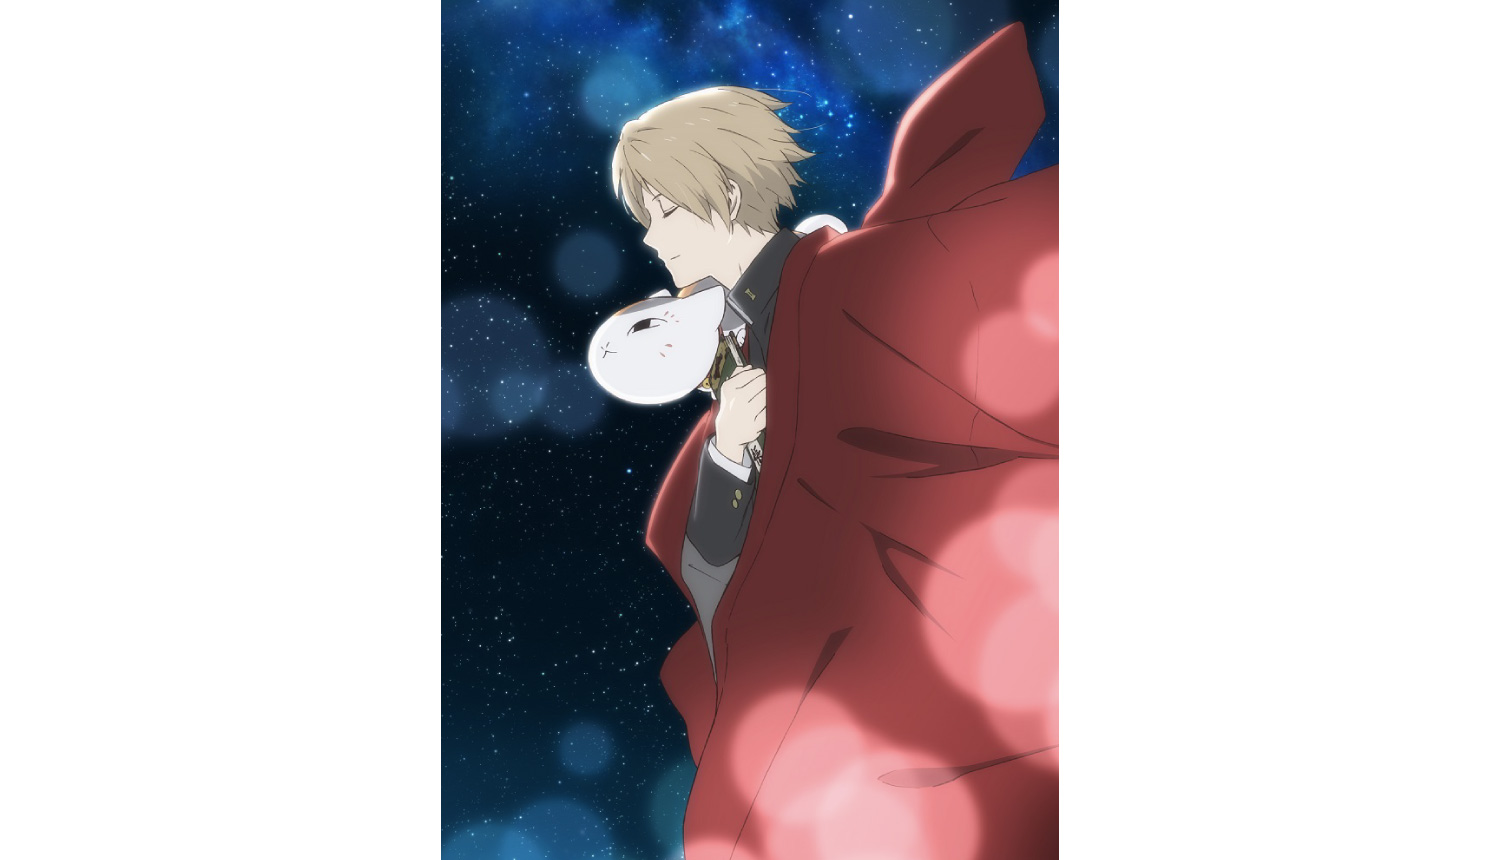 New Natsume S Book Of Friends Anime Film To Released In Spring 2021 Moshi Moshi Nippon ã‚‚ã—ã‚‚ã—ã«ã£ã½ã‚